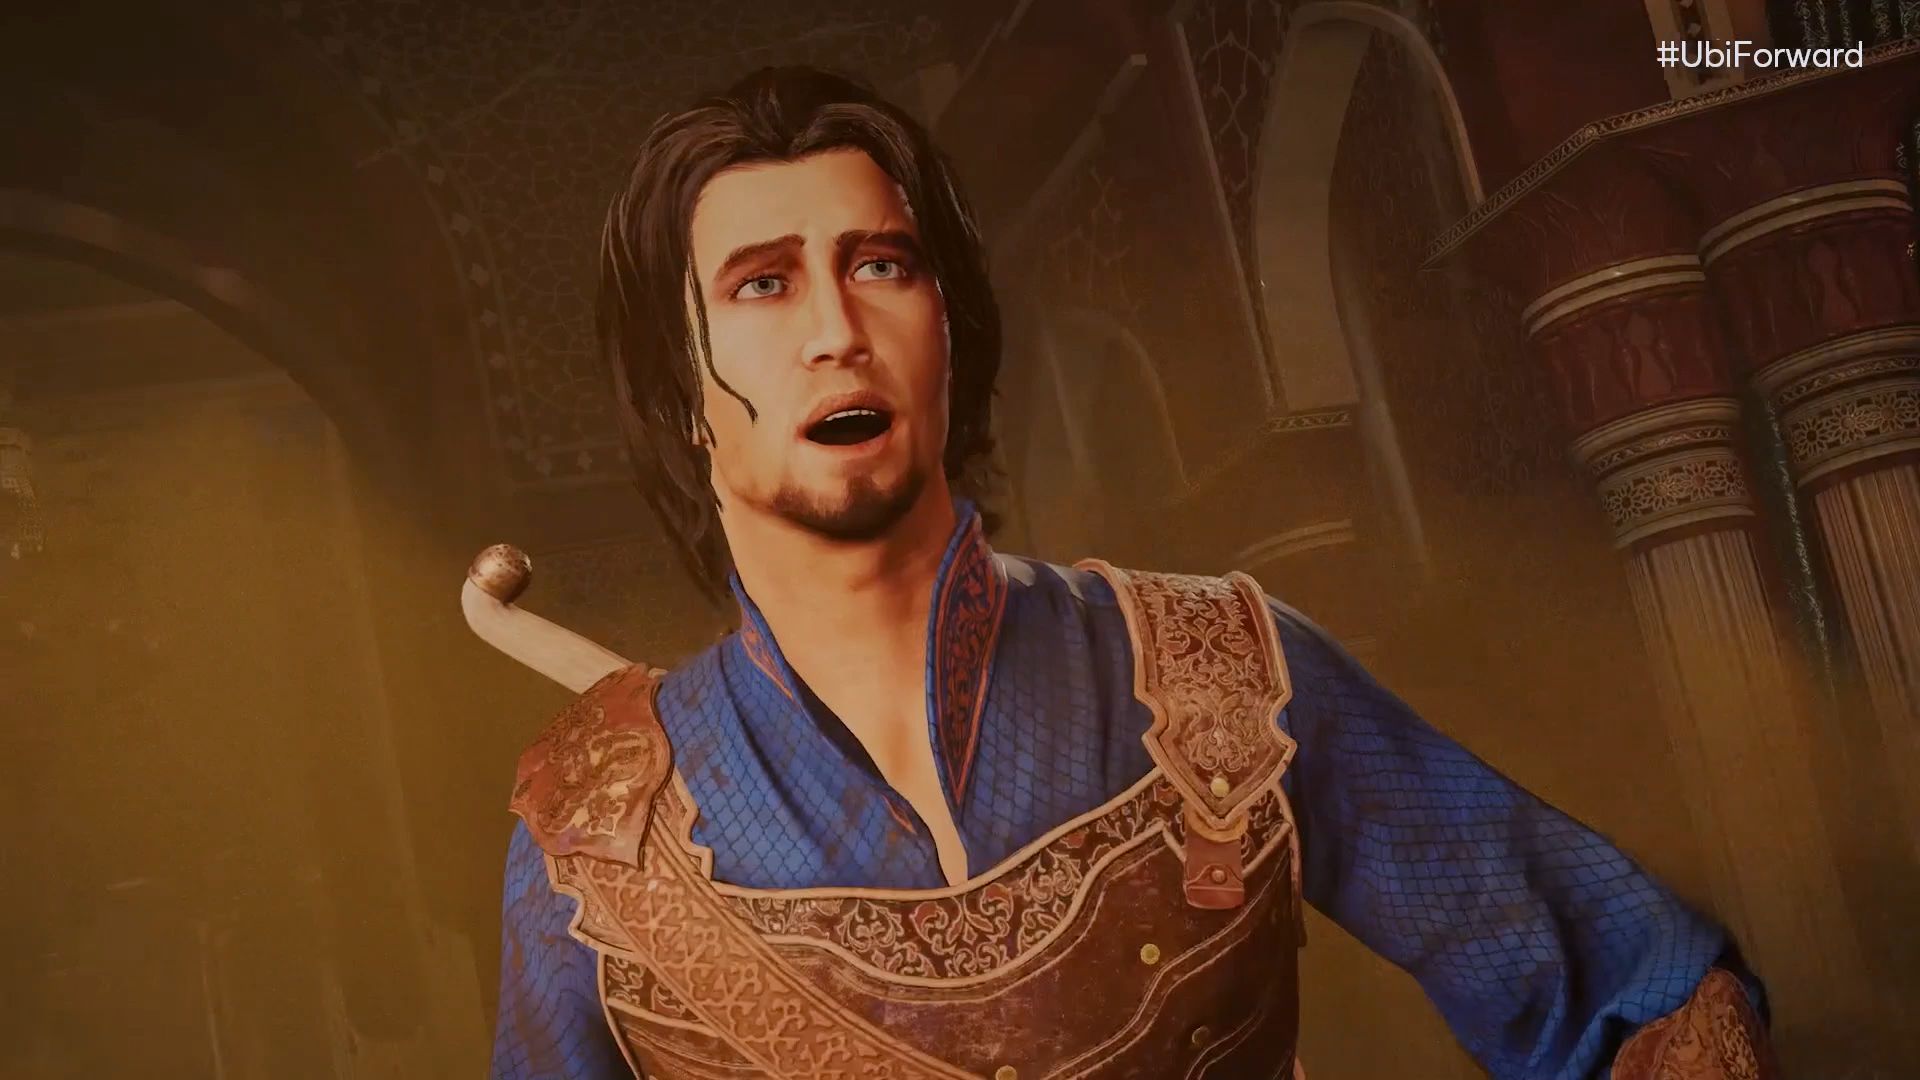 prince of persia: sands of time remake